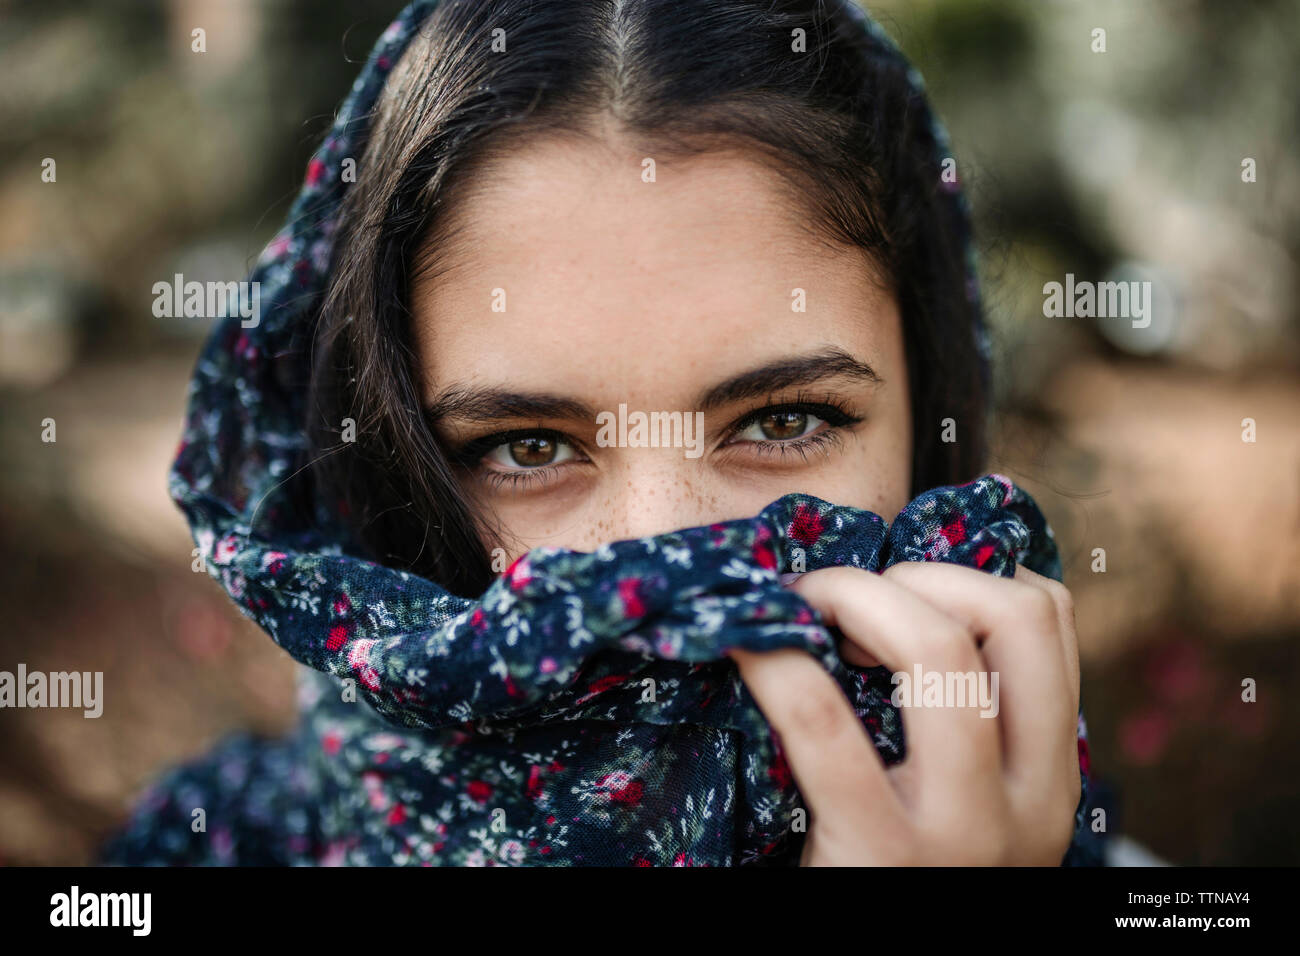 Close-up portrait of teenage girl with obscured face standing outdoors Stock Photo